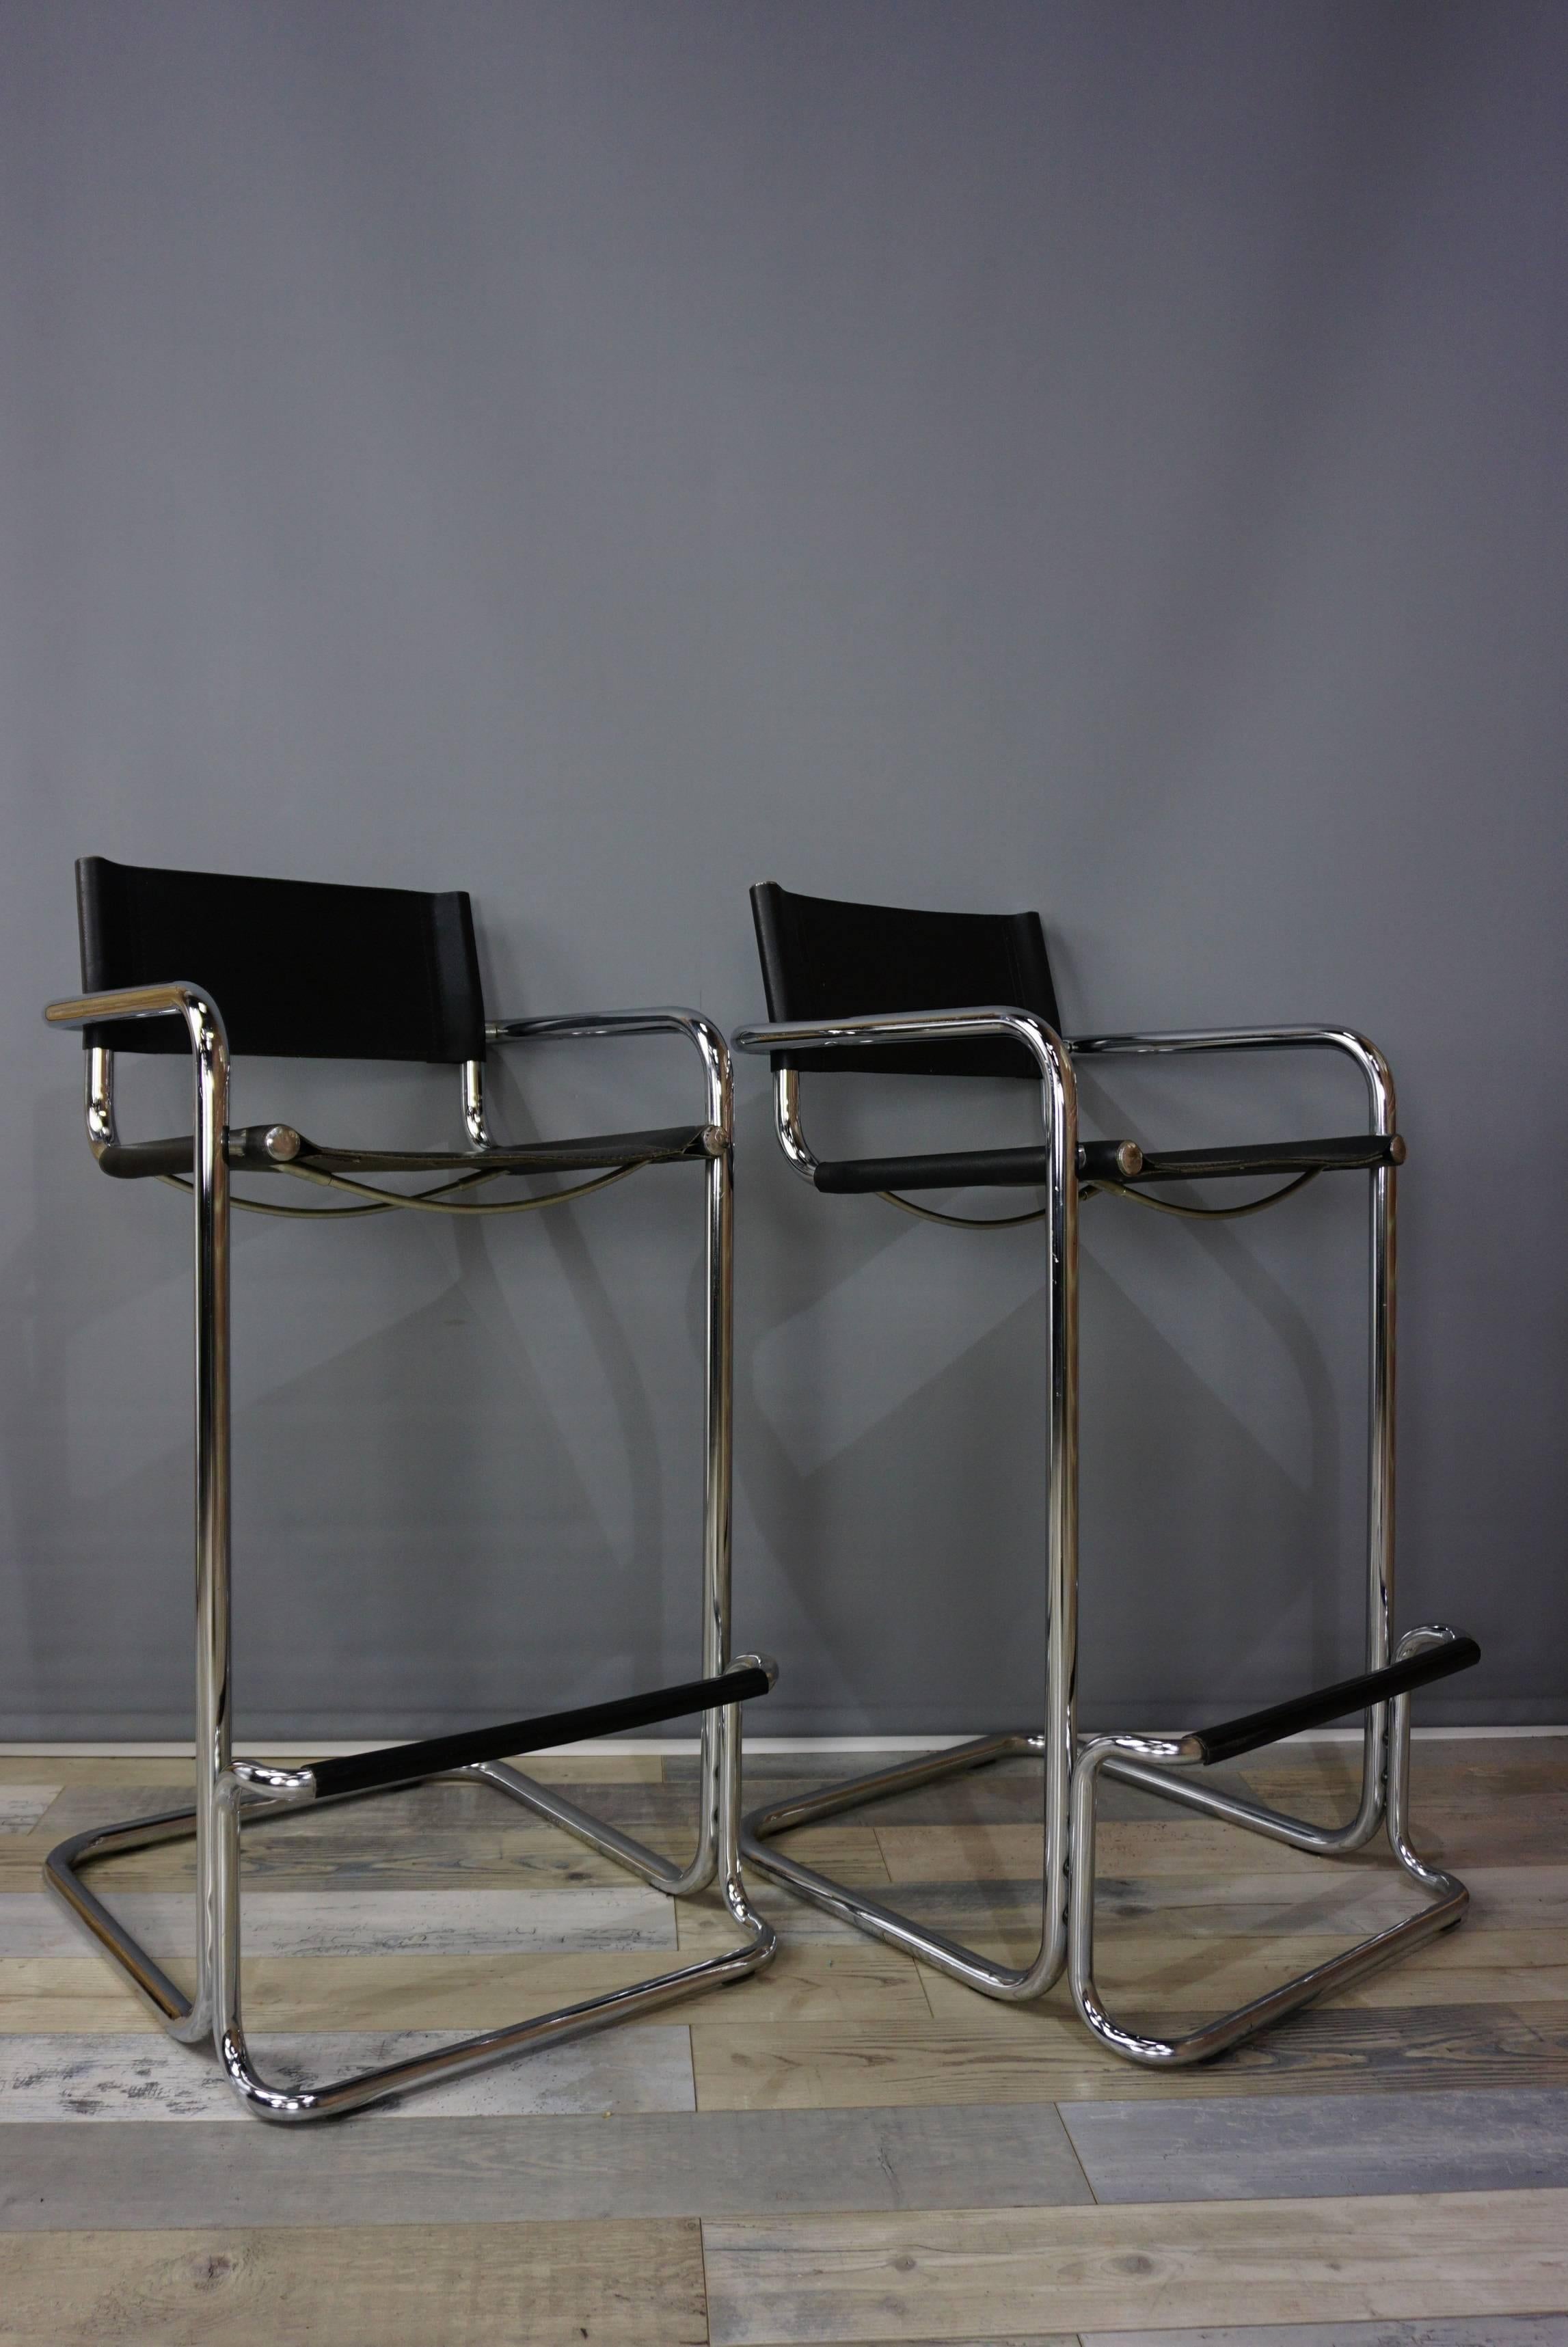 Set of four chrome and leather bar stools Mart Stam Bauhaus design: cantilevered chrome frame with black leather.